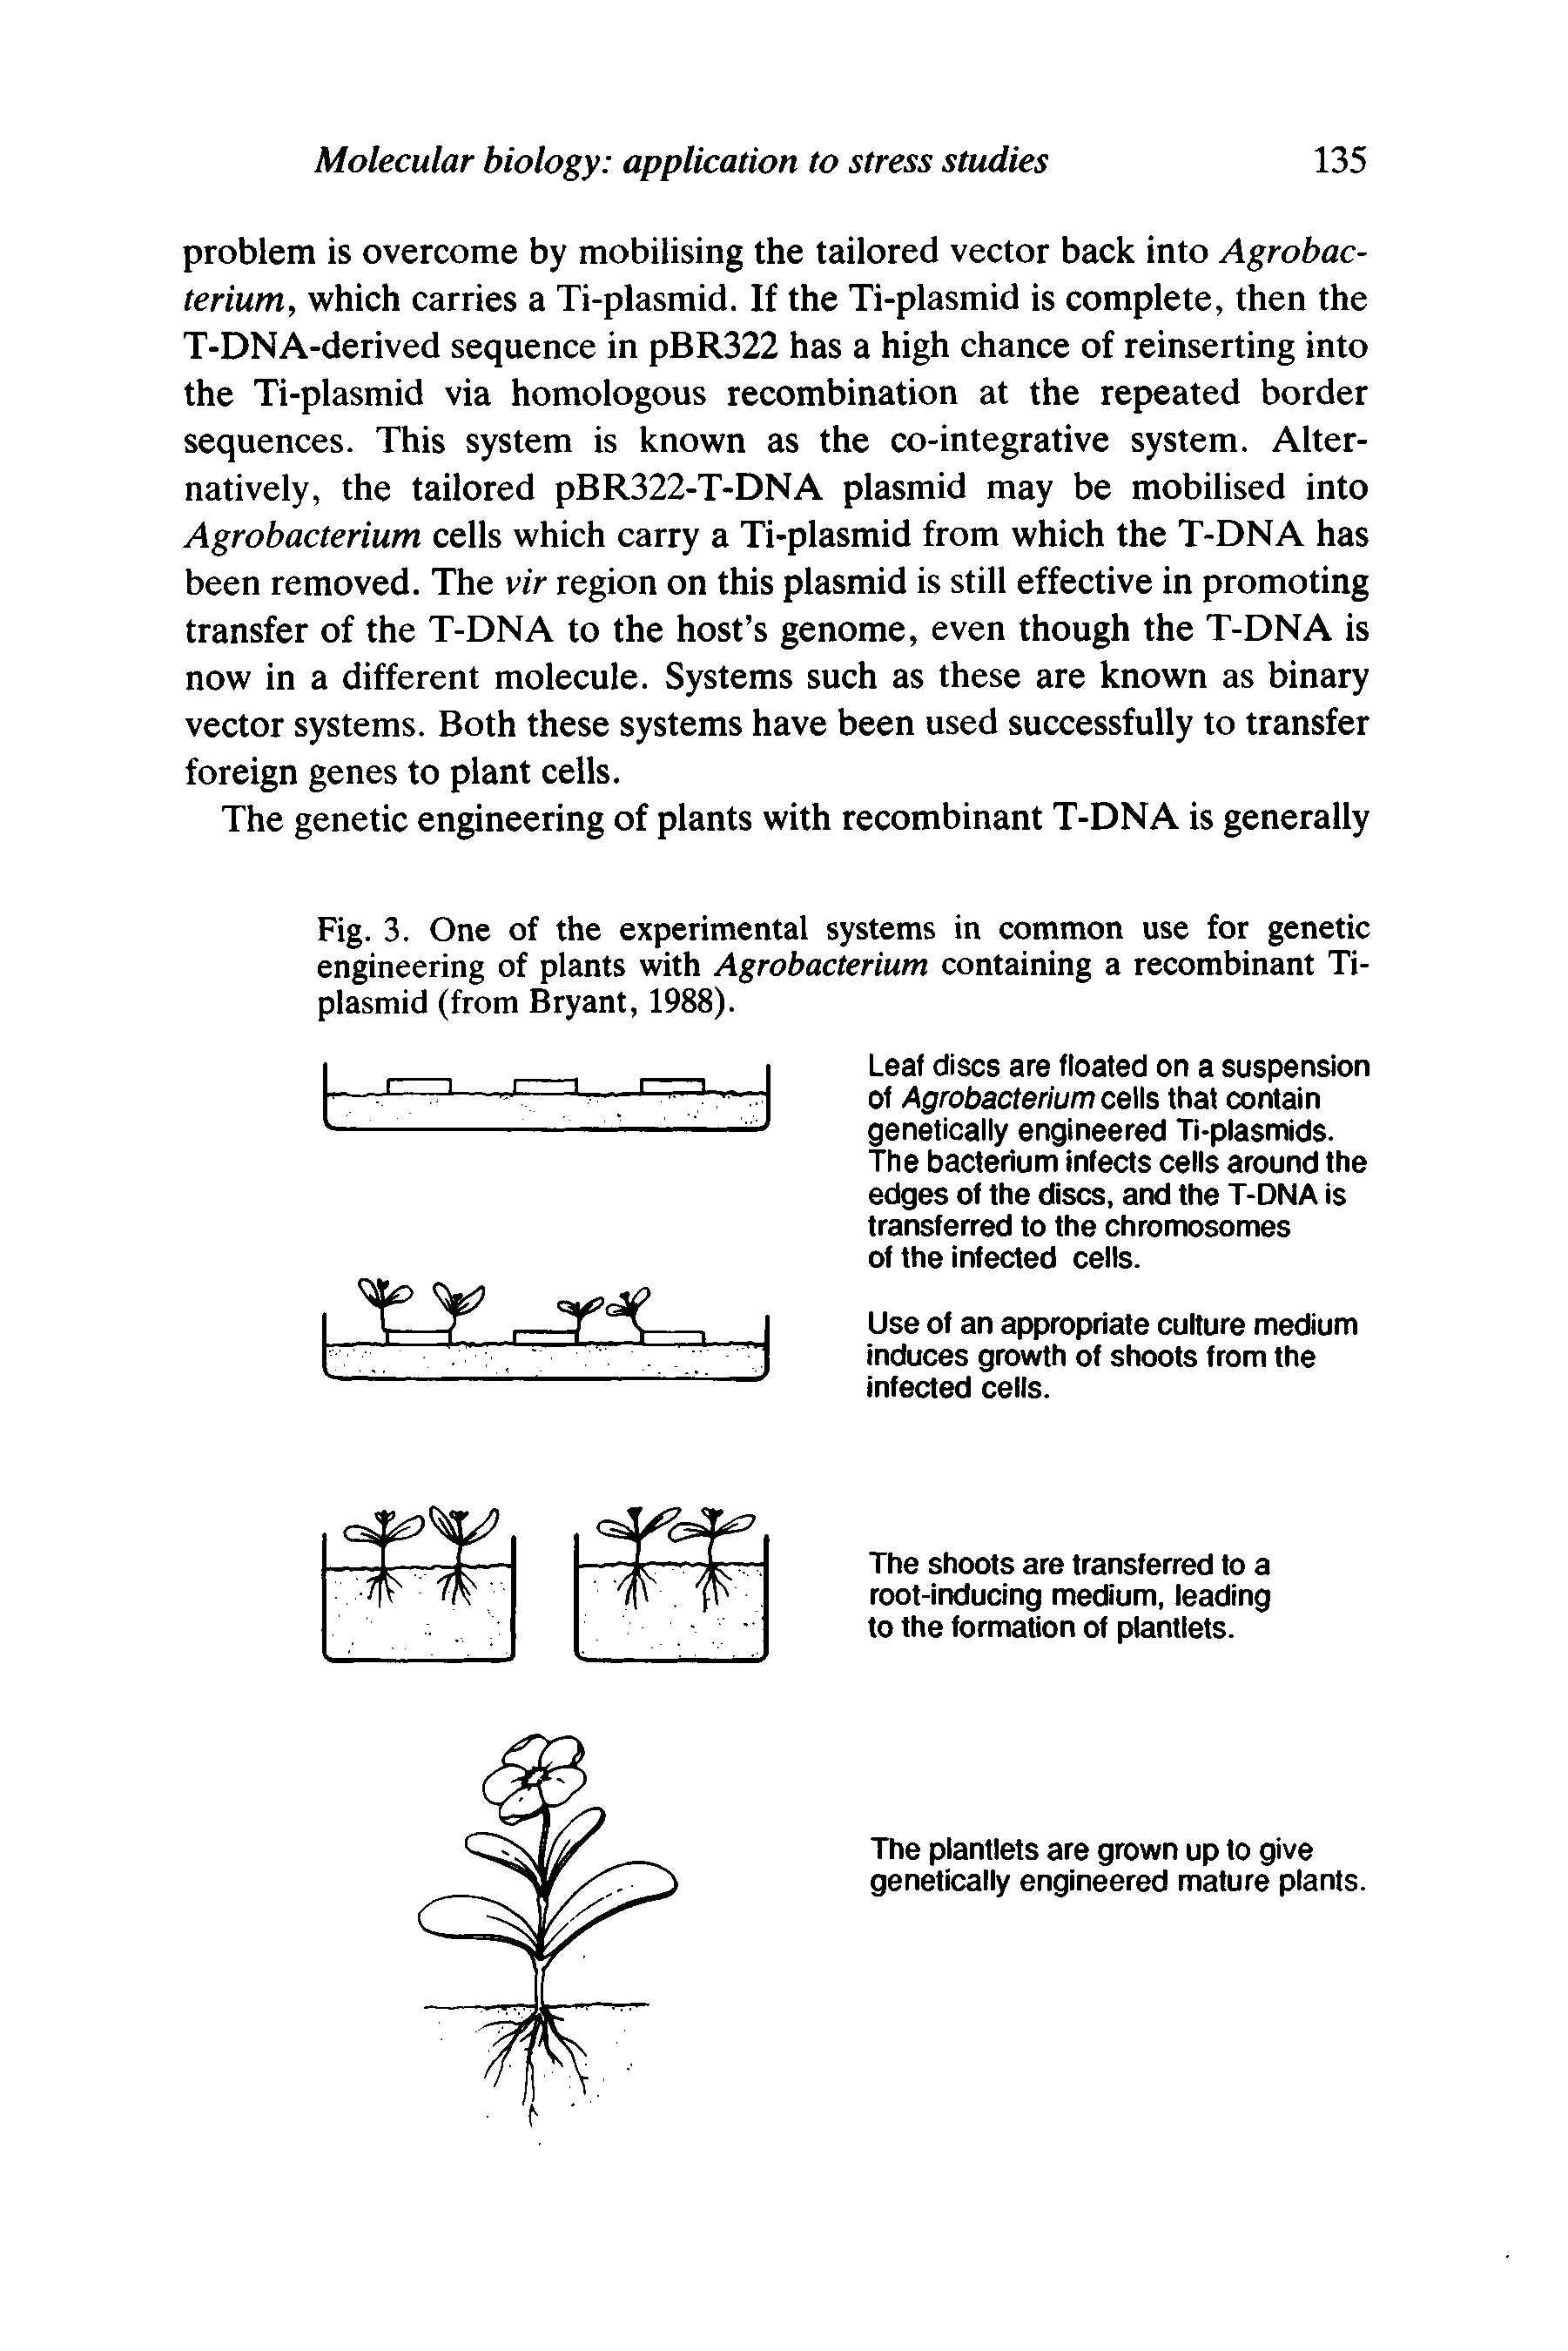 Fig. 3. One of the experimental systems in common use for genetic engineering of plants with Agrobacterium containing a recombinant Ti-plasmid (from Bryant, 1988).